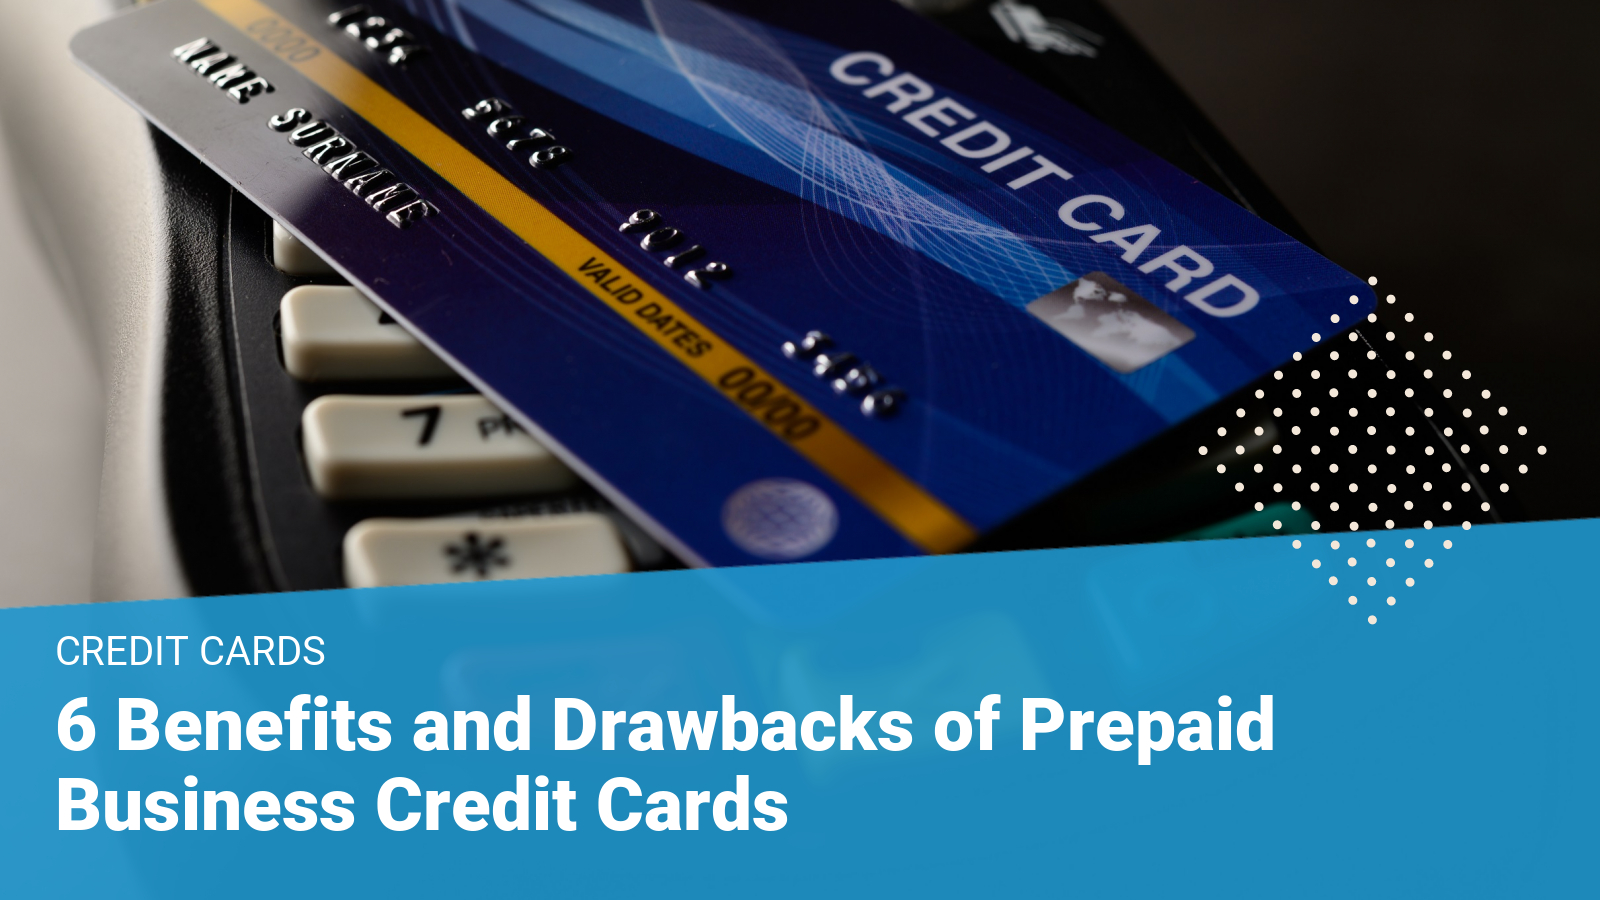 Prepaid Business Credit Cards